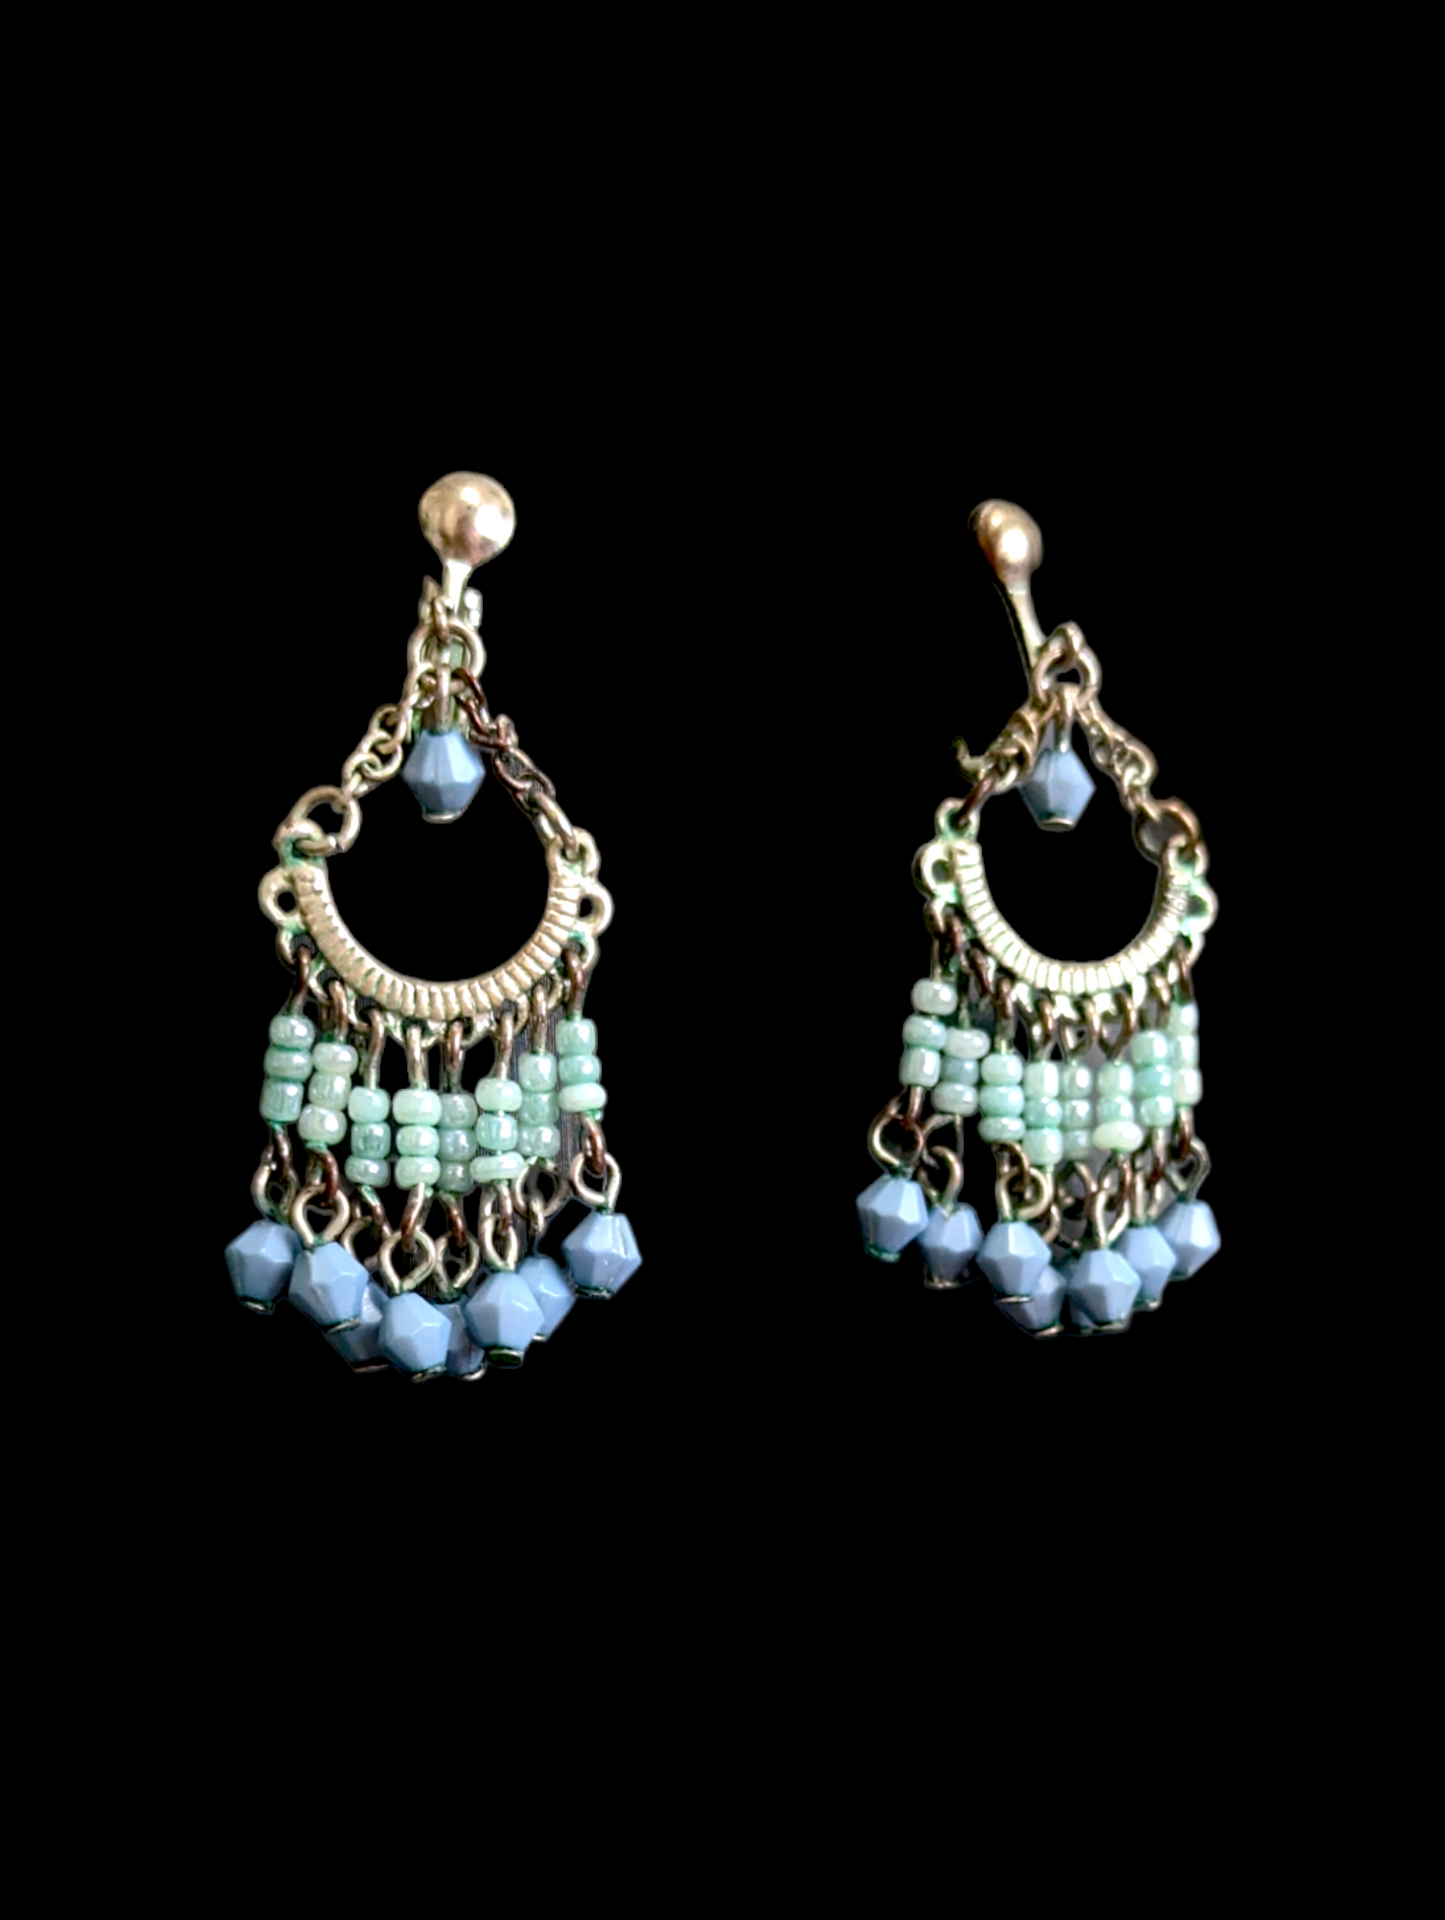 Vintage Tribal Mid-Century Modern Inspired Turquoise Necklace and Chandelier Dangle Earrings Set